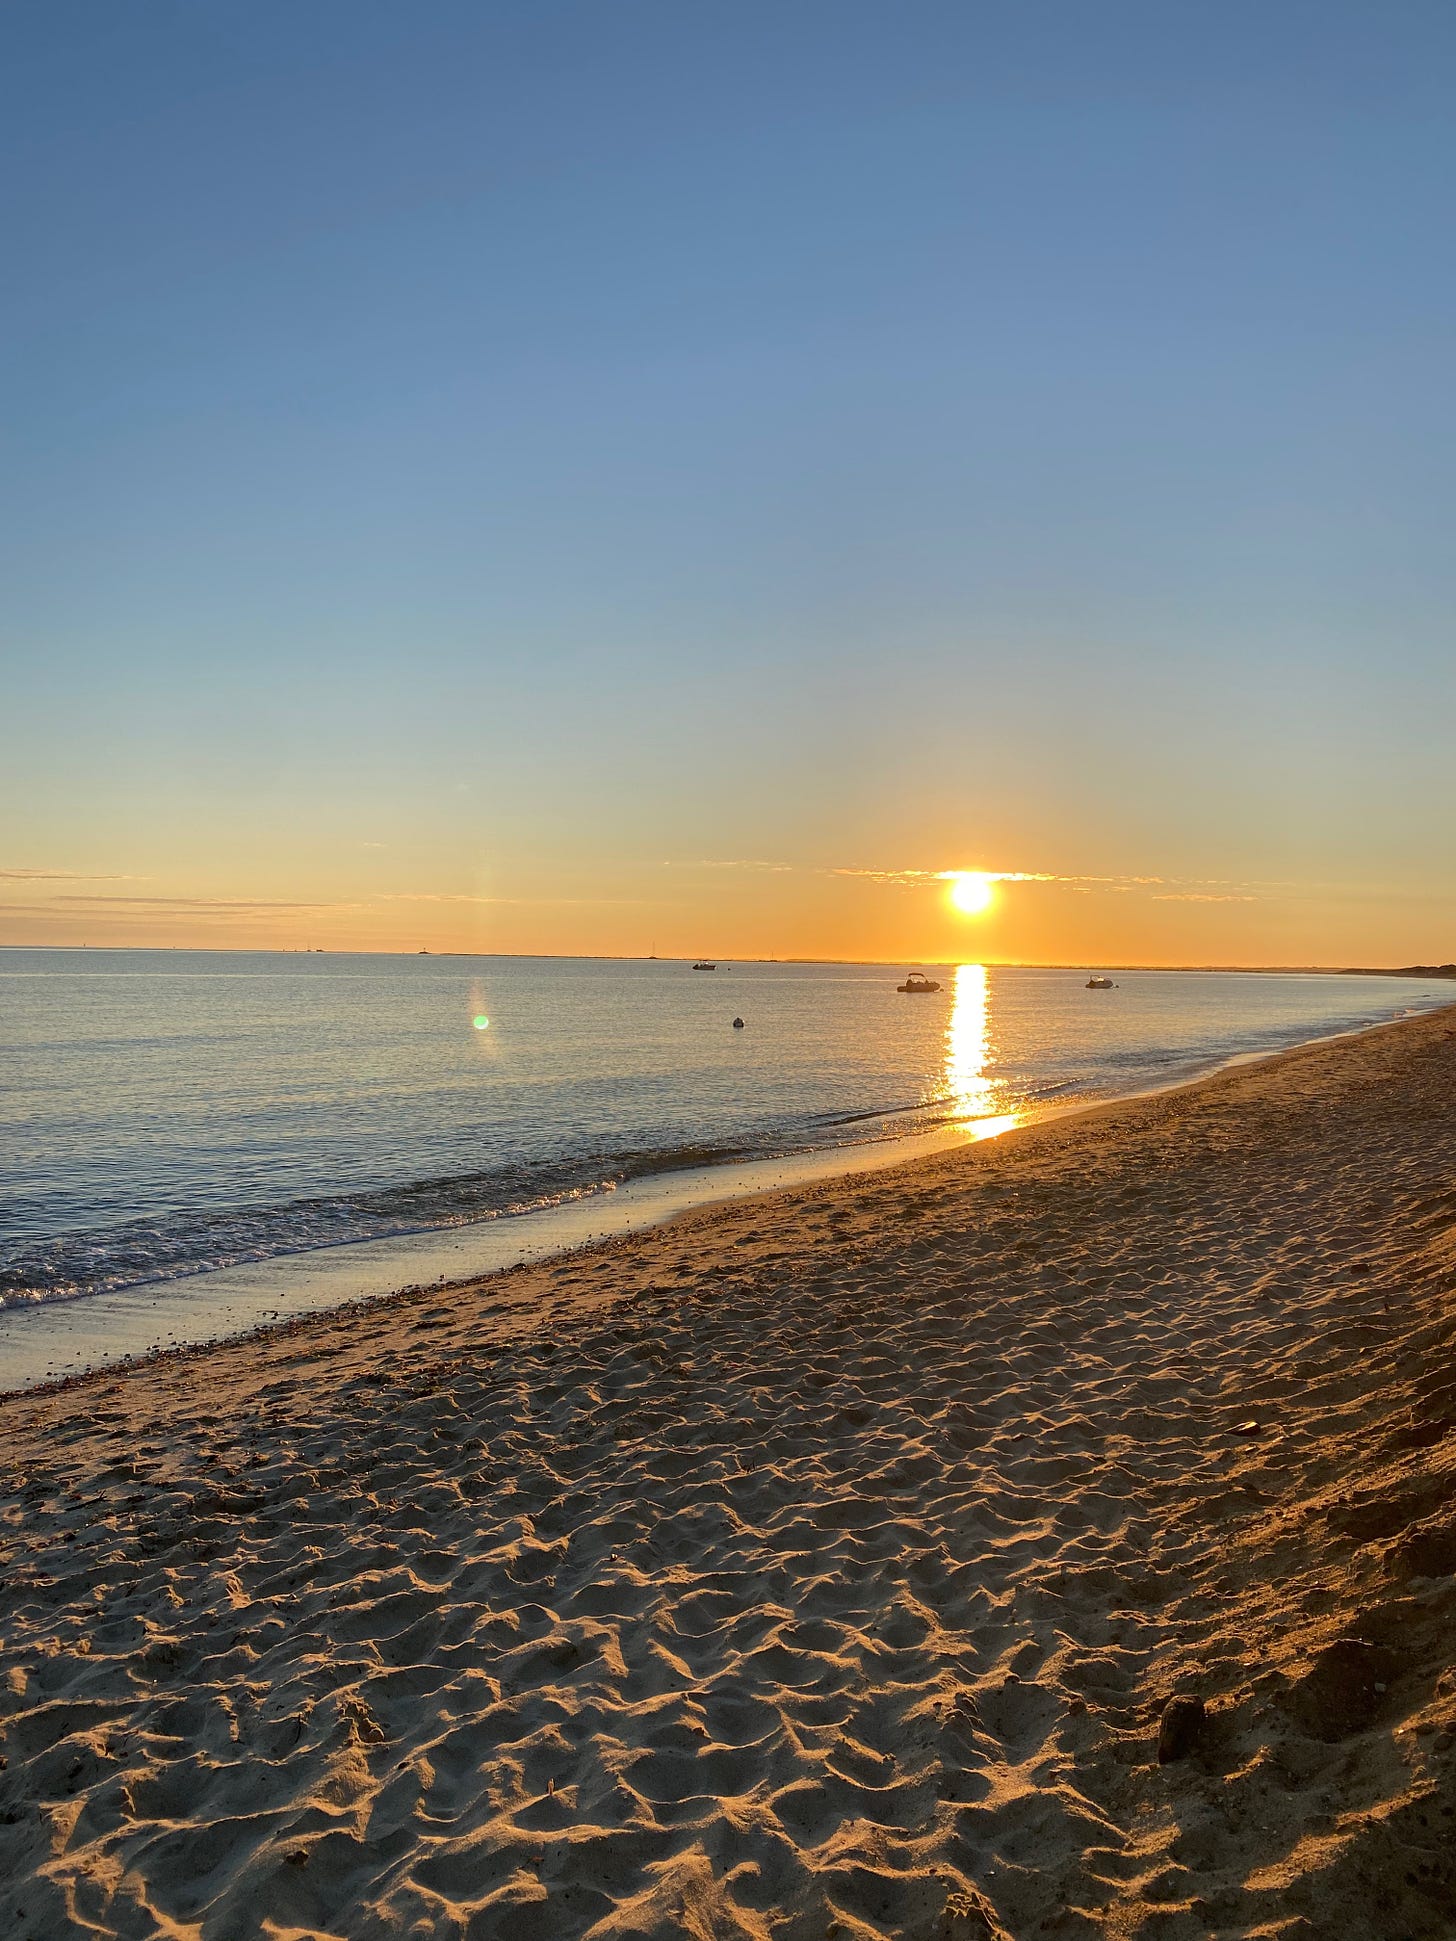 A beach at sunrise. The golden sun is low on the horizon, casting a golden trail across the still water. The beach is sunlit and the sky is pale blue. 